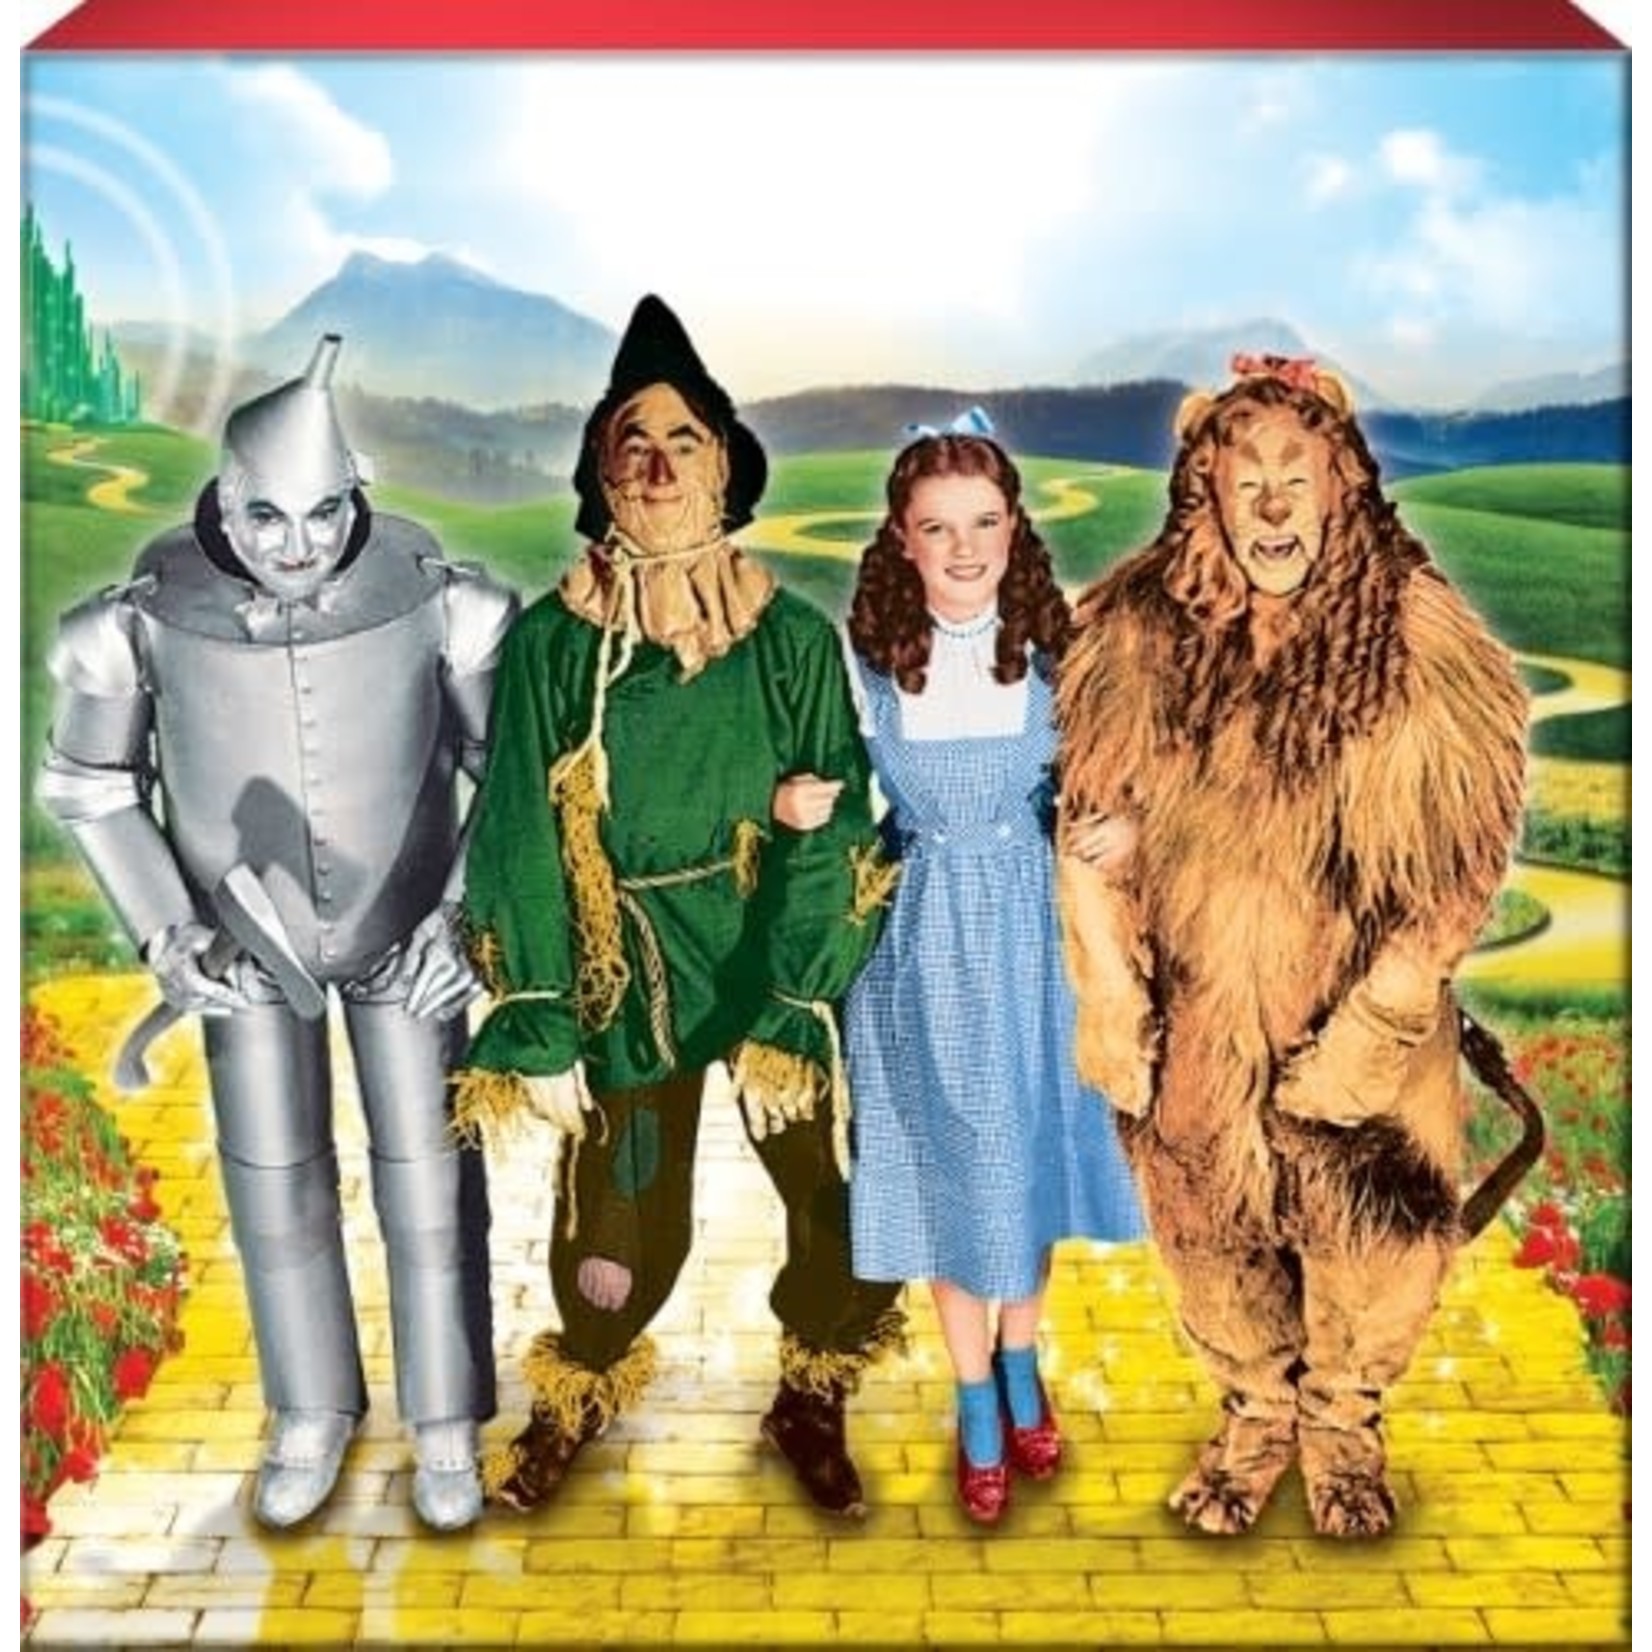 WIZARD OF OZ BOX SIGN